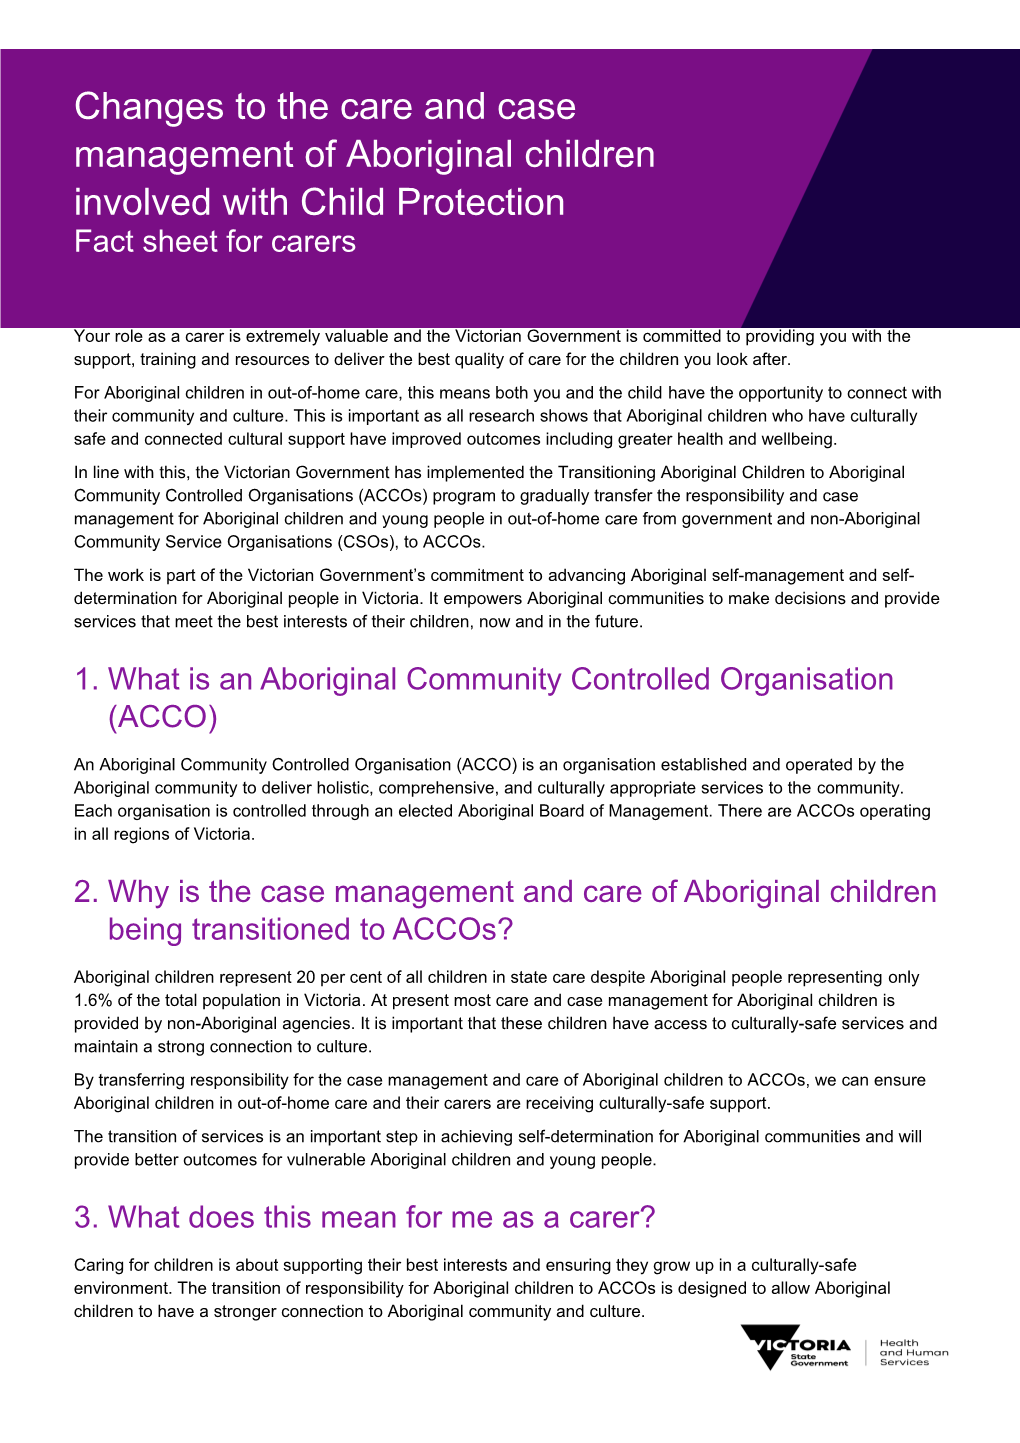 Changes to the Care and Case Management of Aboriginal Children Involved with Child Protection